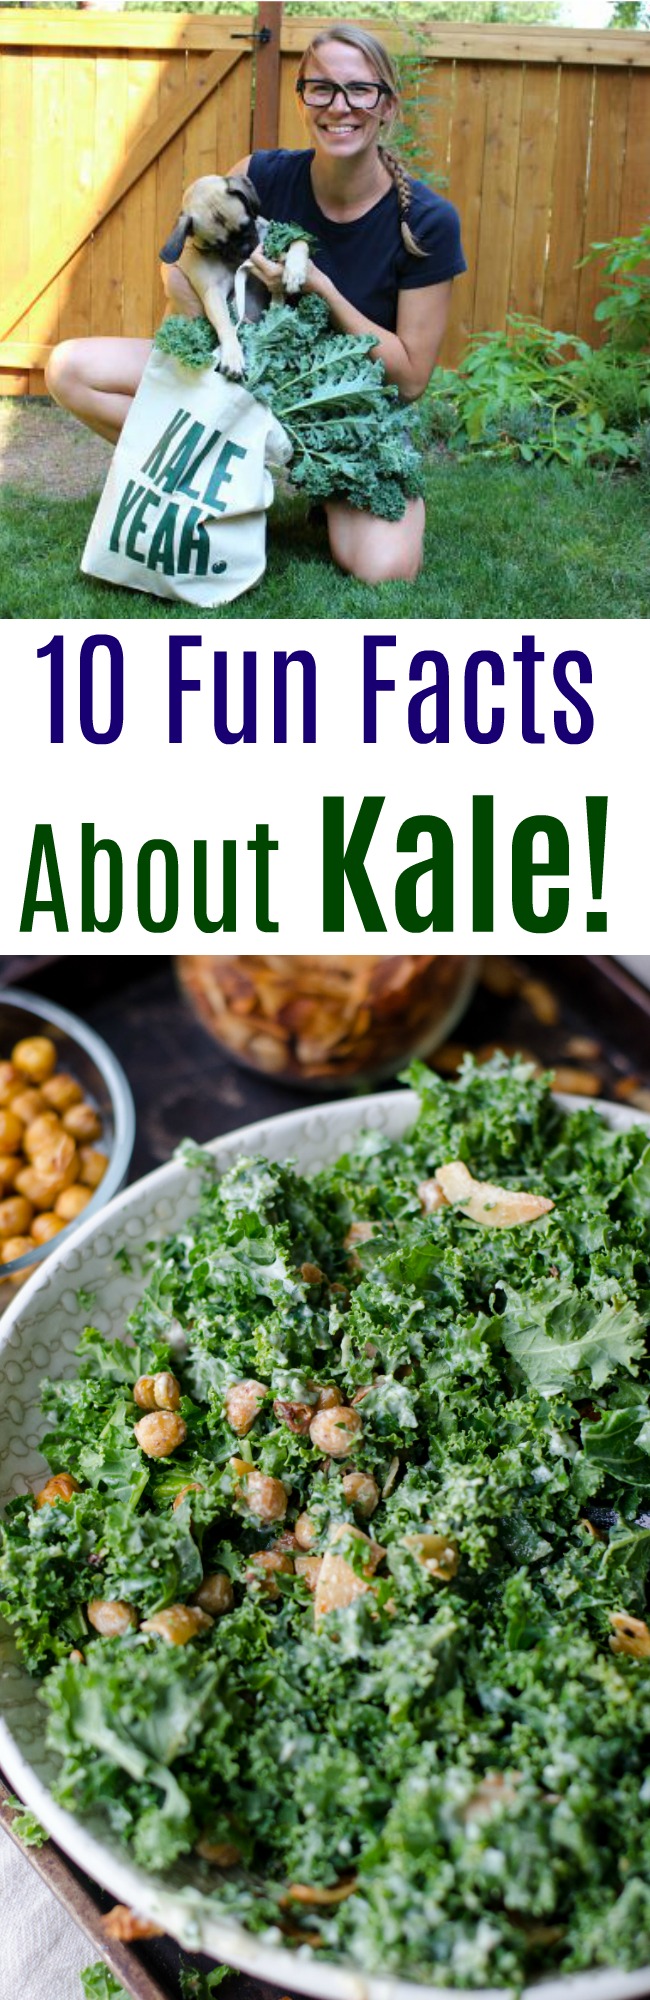 10 Fun Facts About Kale!